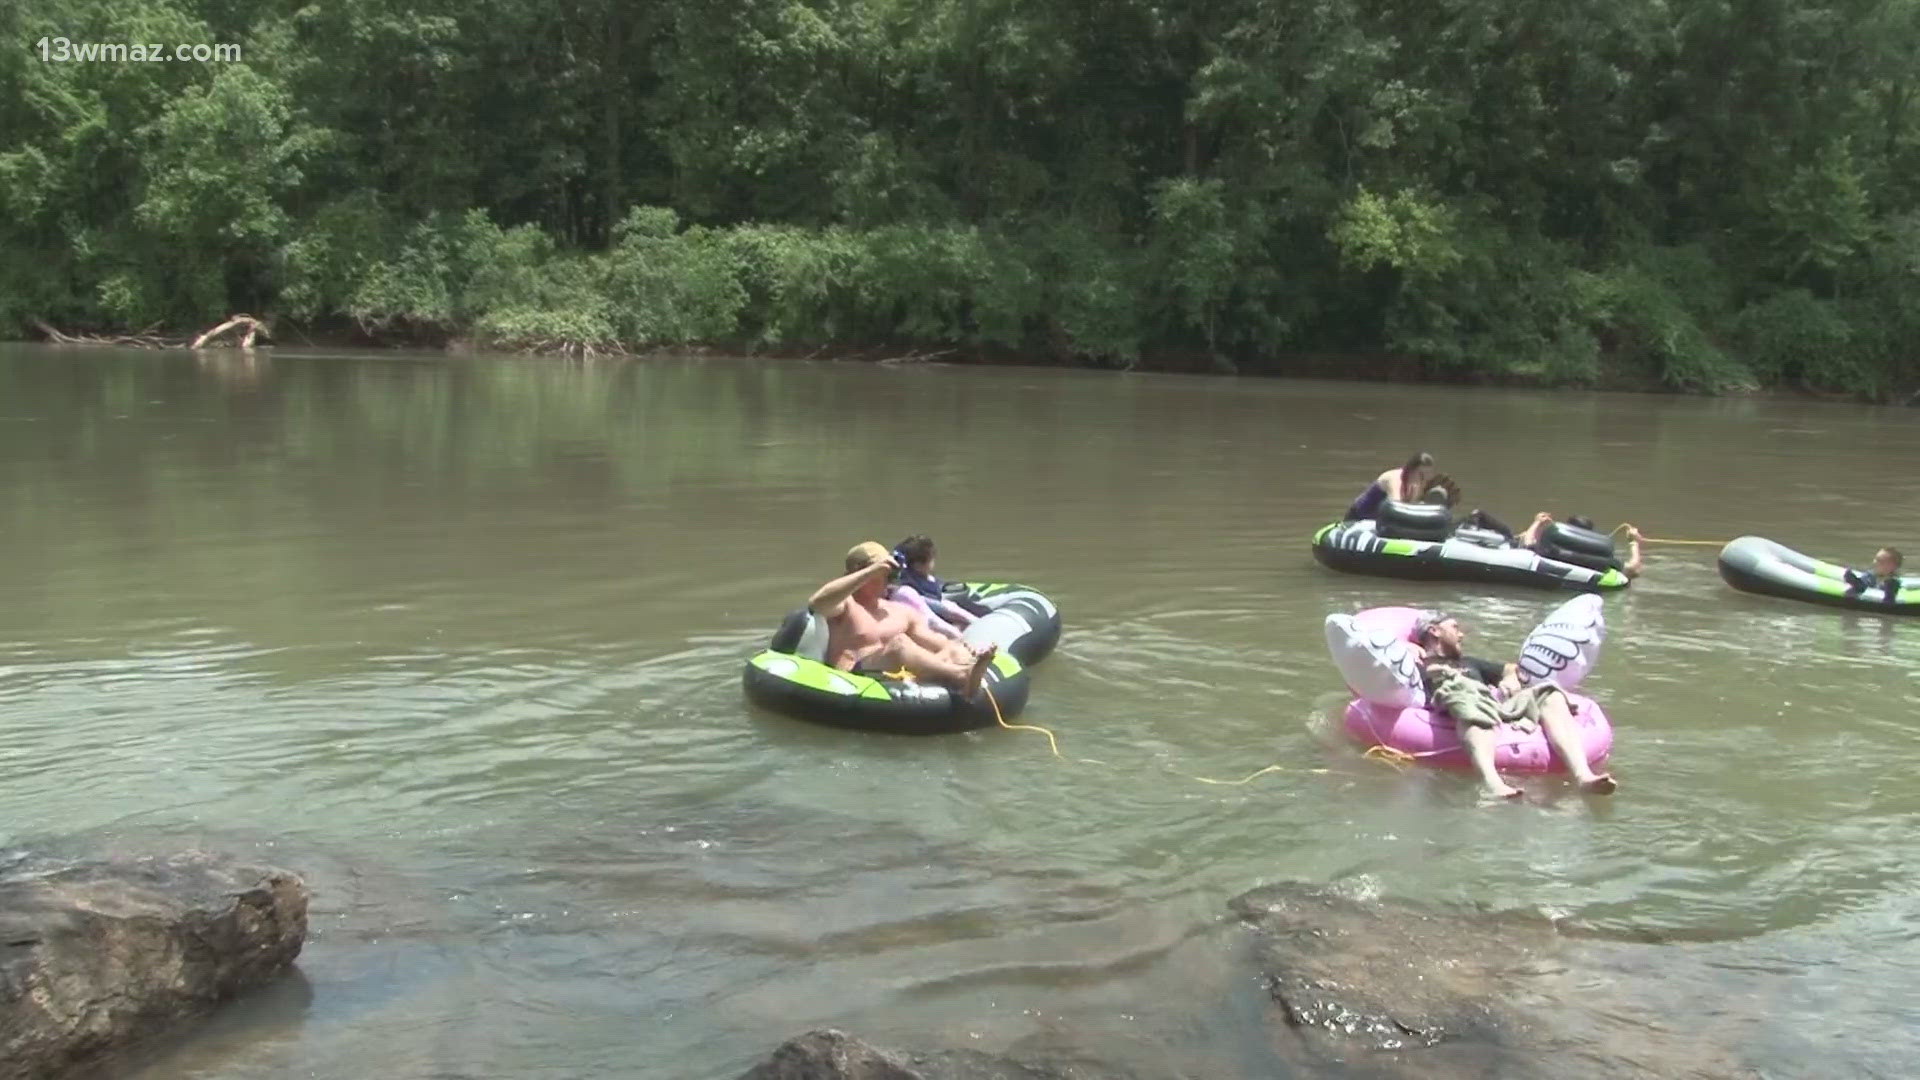 The July 4th heat brought many visitors to Amerson River Park, including the Cleveland family.